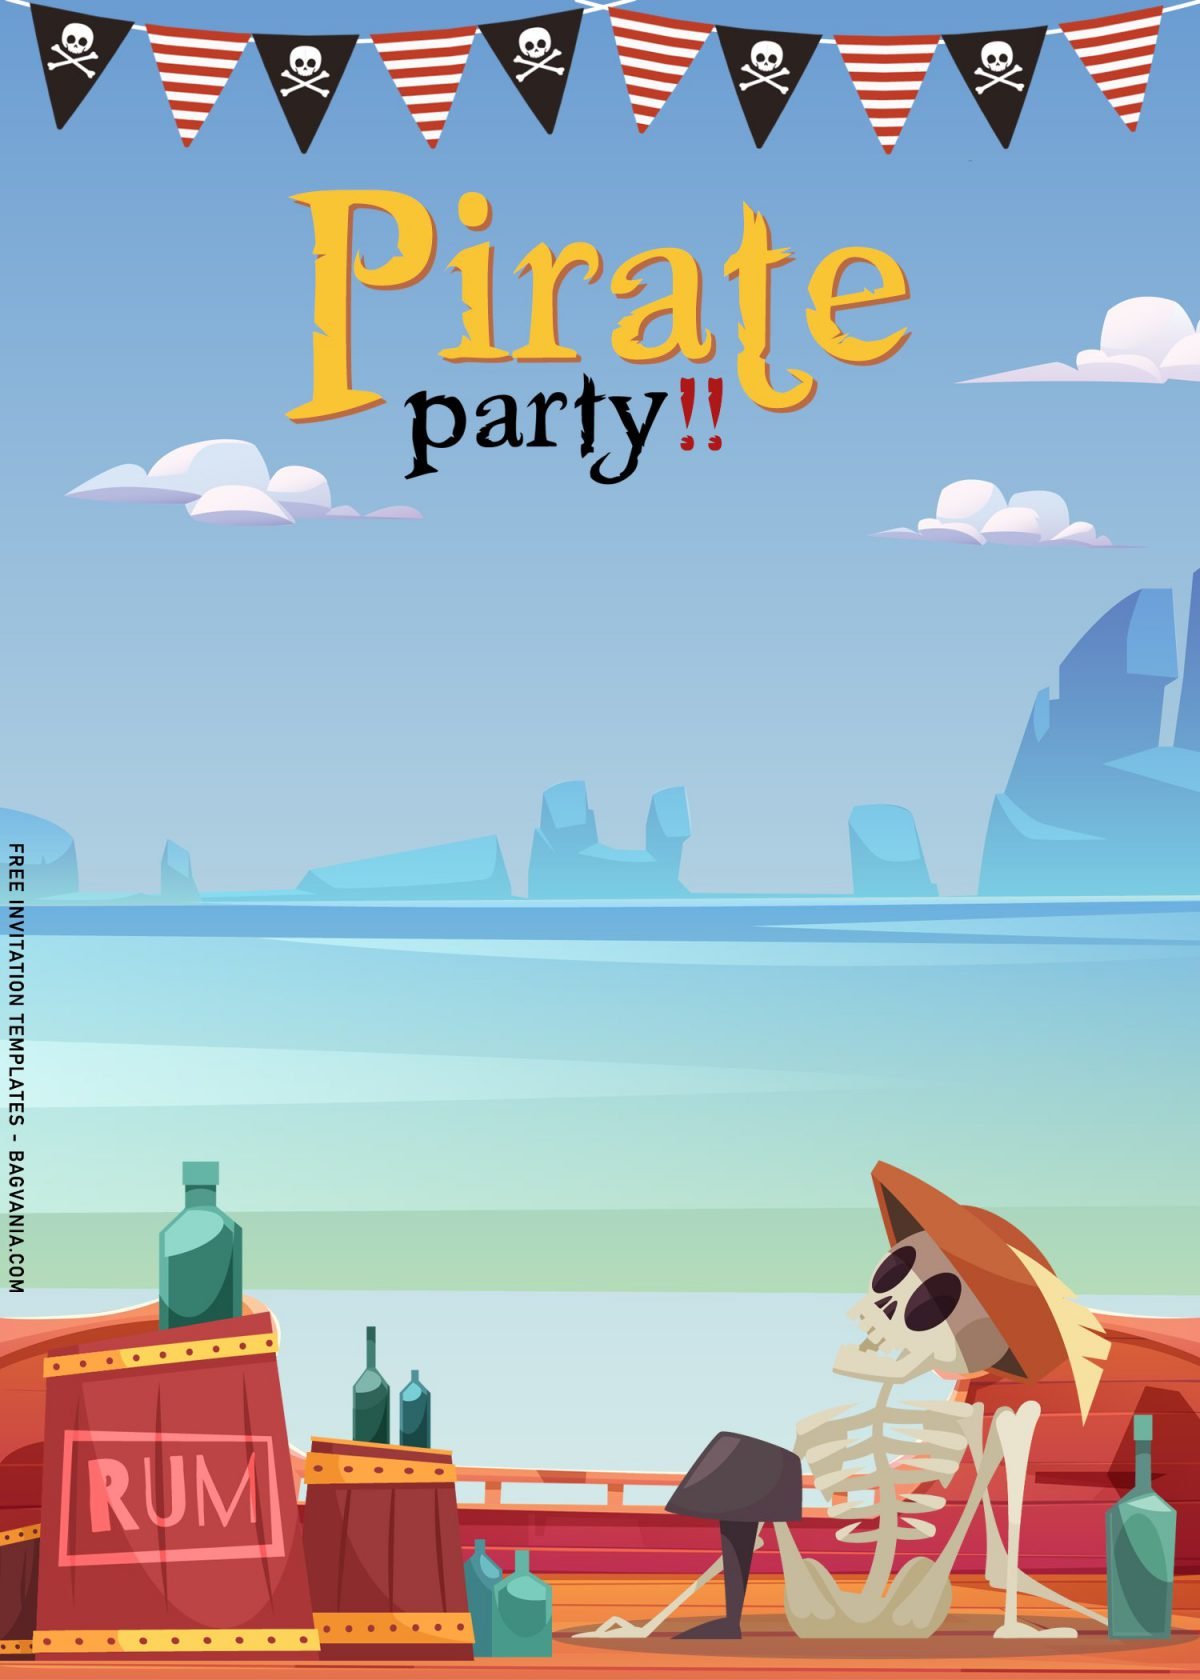 7+ Personalized Pirate Birthday Invitation Templates For Any Ages and has Pirate Ship's Deck